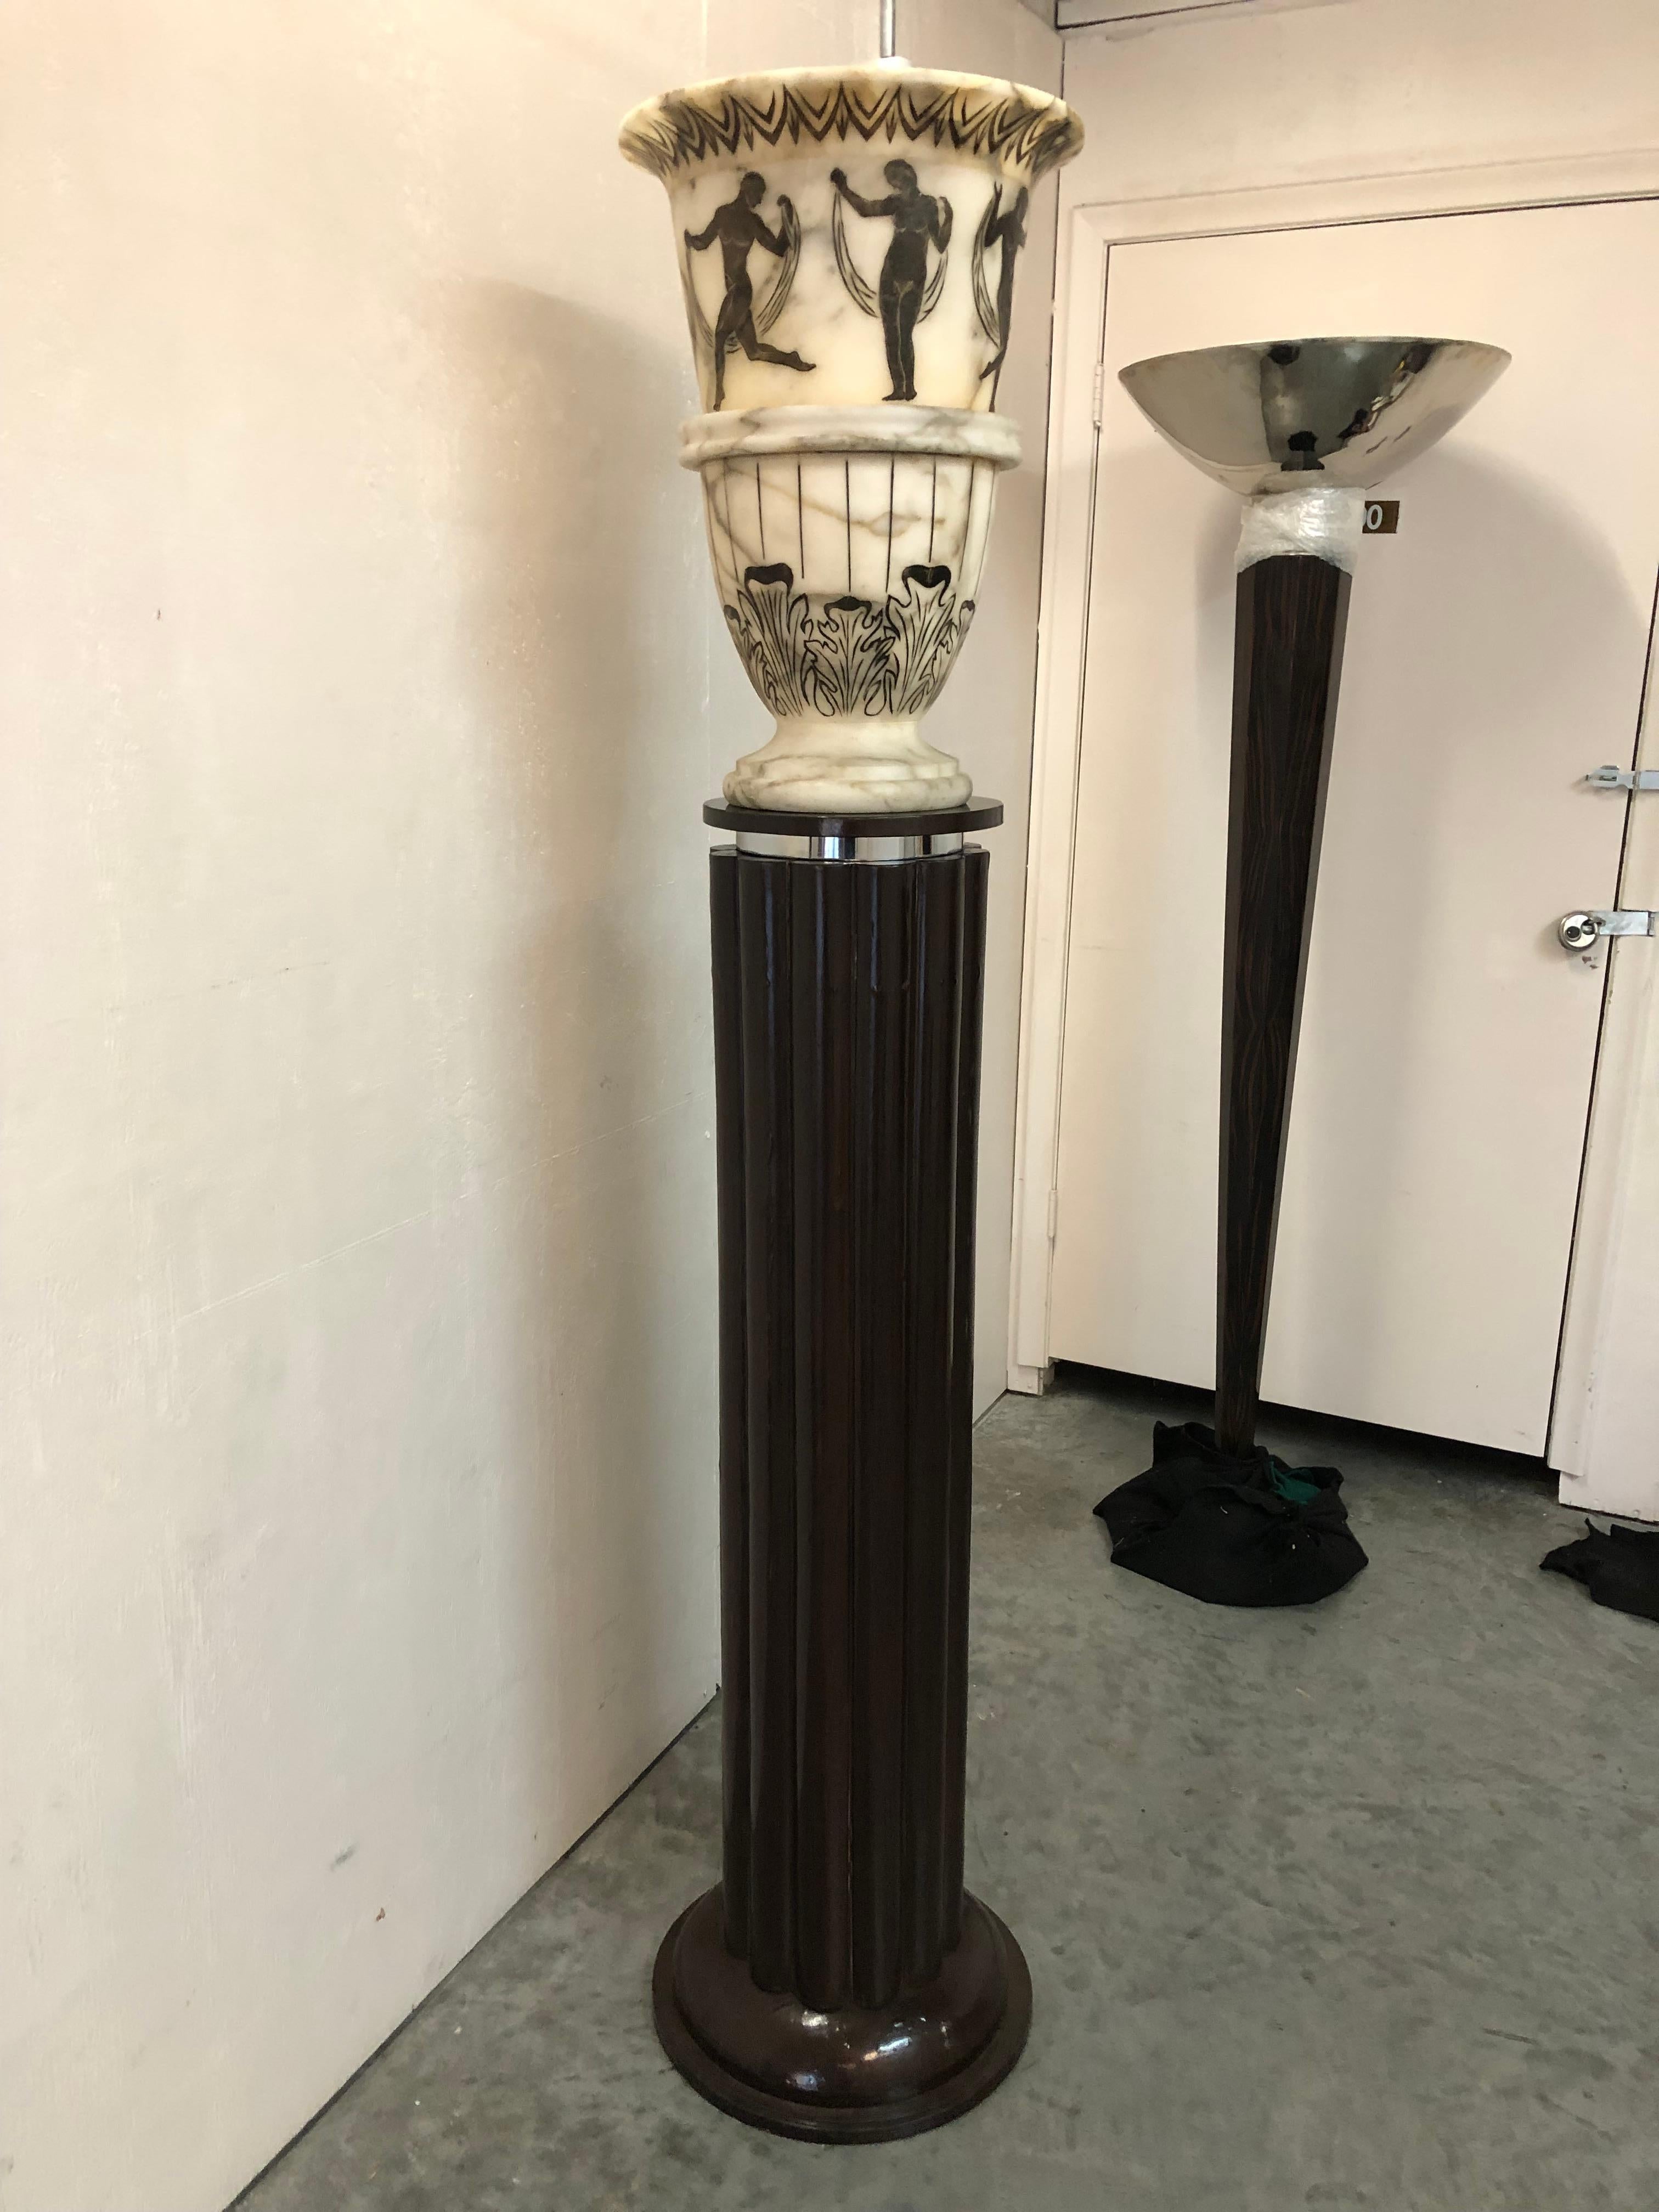 Big Pair of Art Deco Floor Lamps, France, Materials: Wood and Alabaster, 1930 For Sale 8